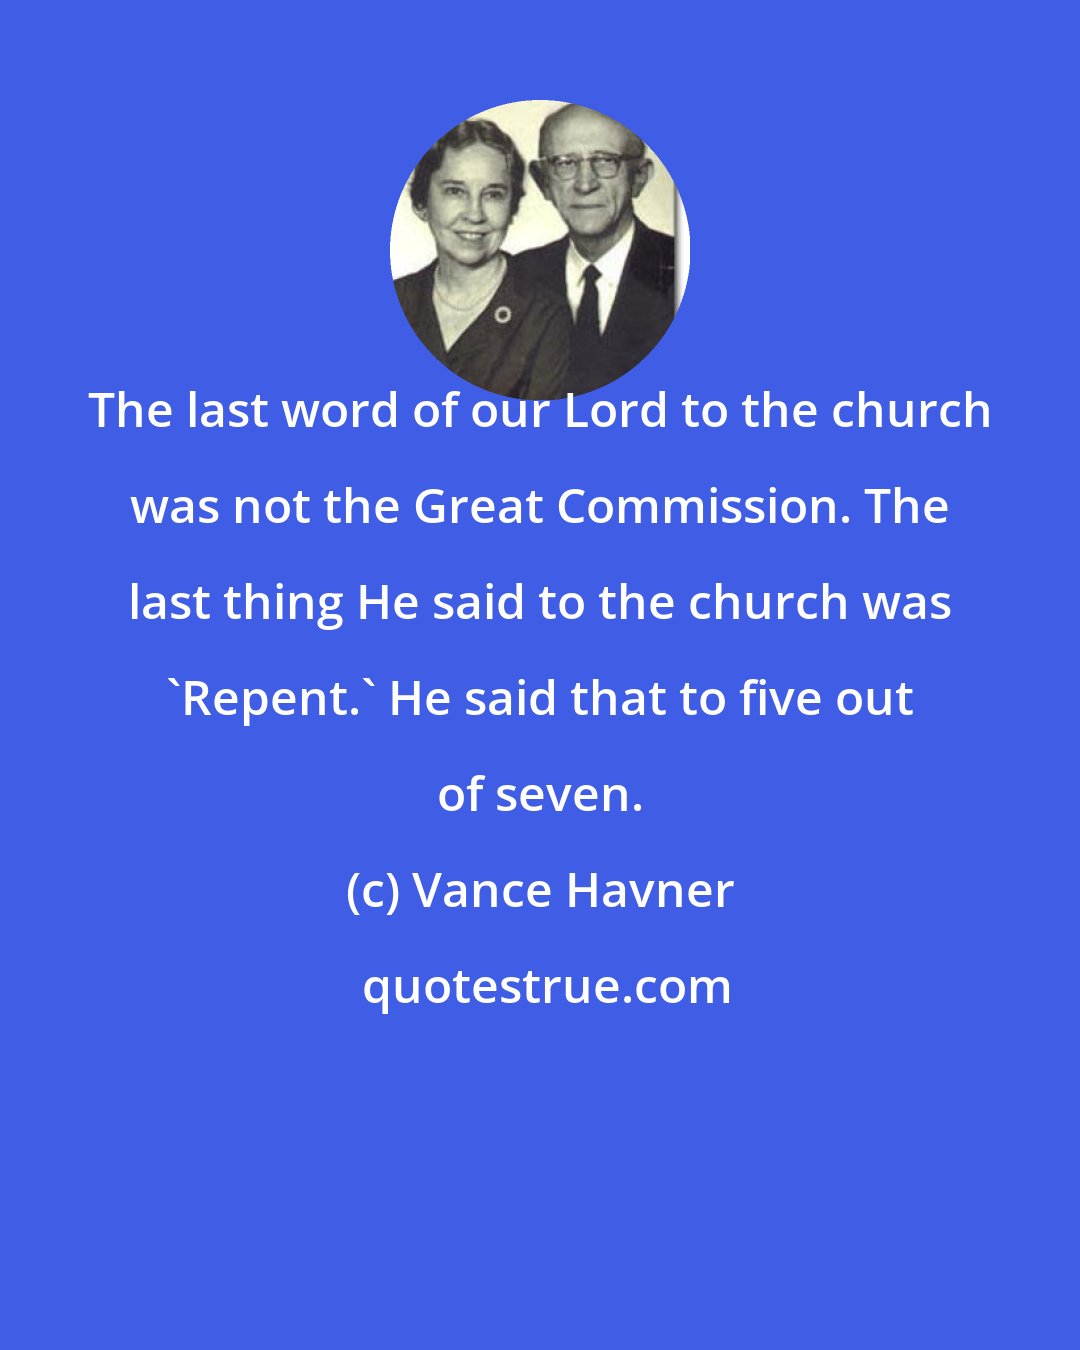 Vance Havner: The last word of our Lord to the church was not the Great Commission. The last thing He said to the church was 'Repent.' He said that to five out of seven.